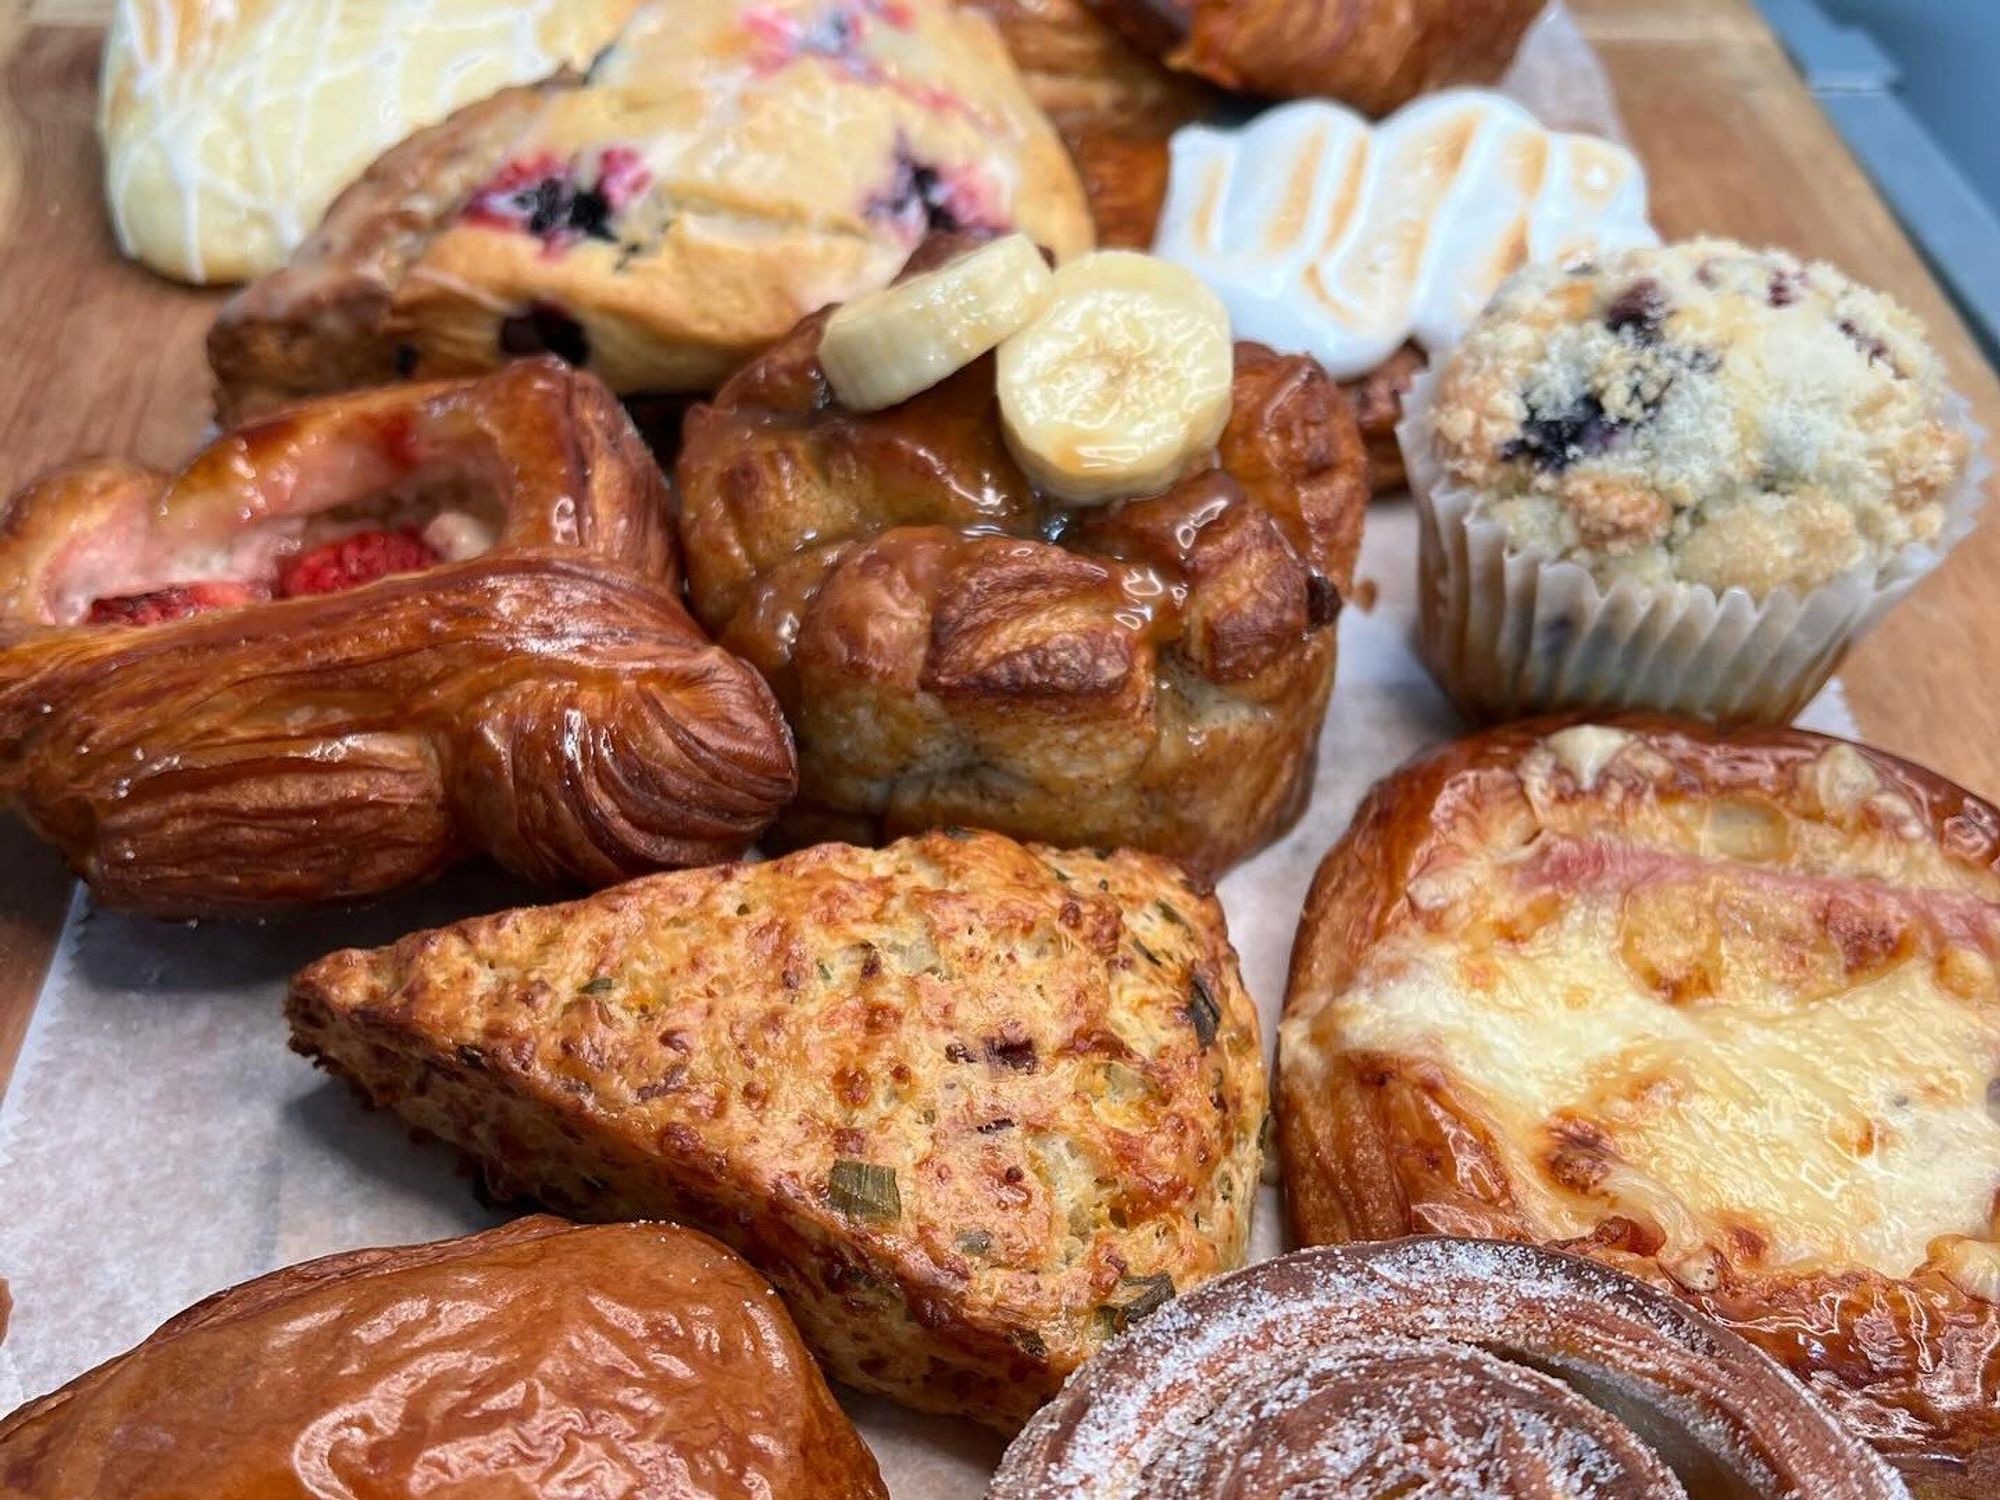 Baked pastries